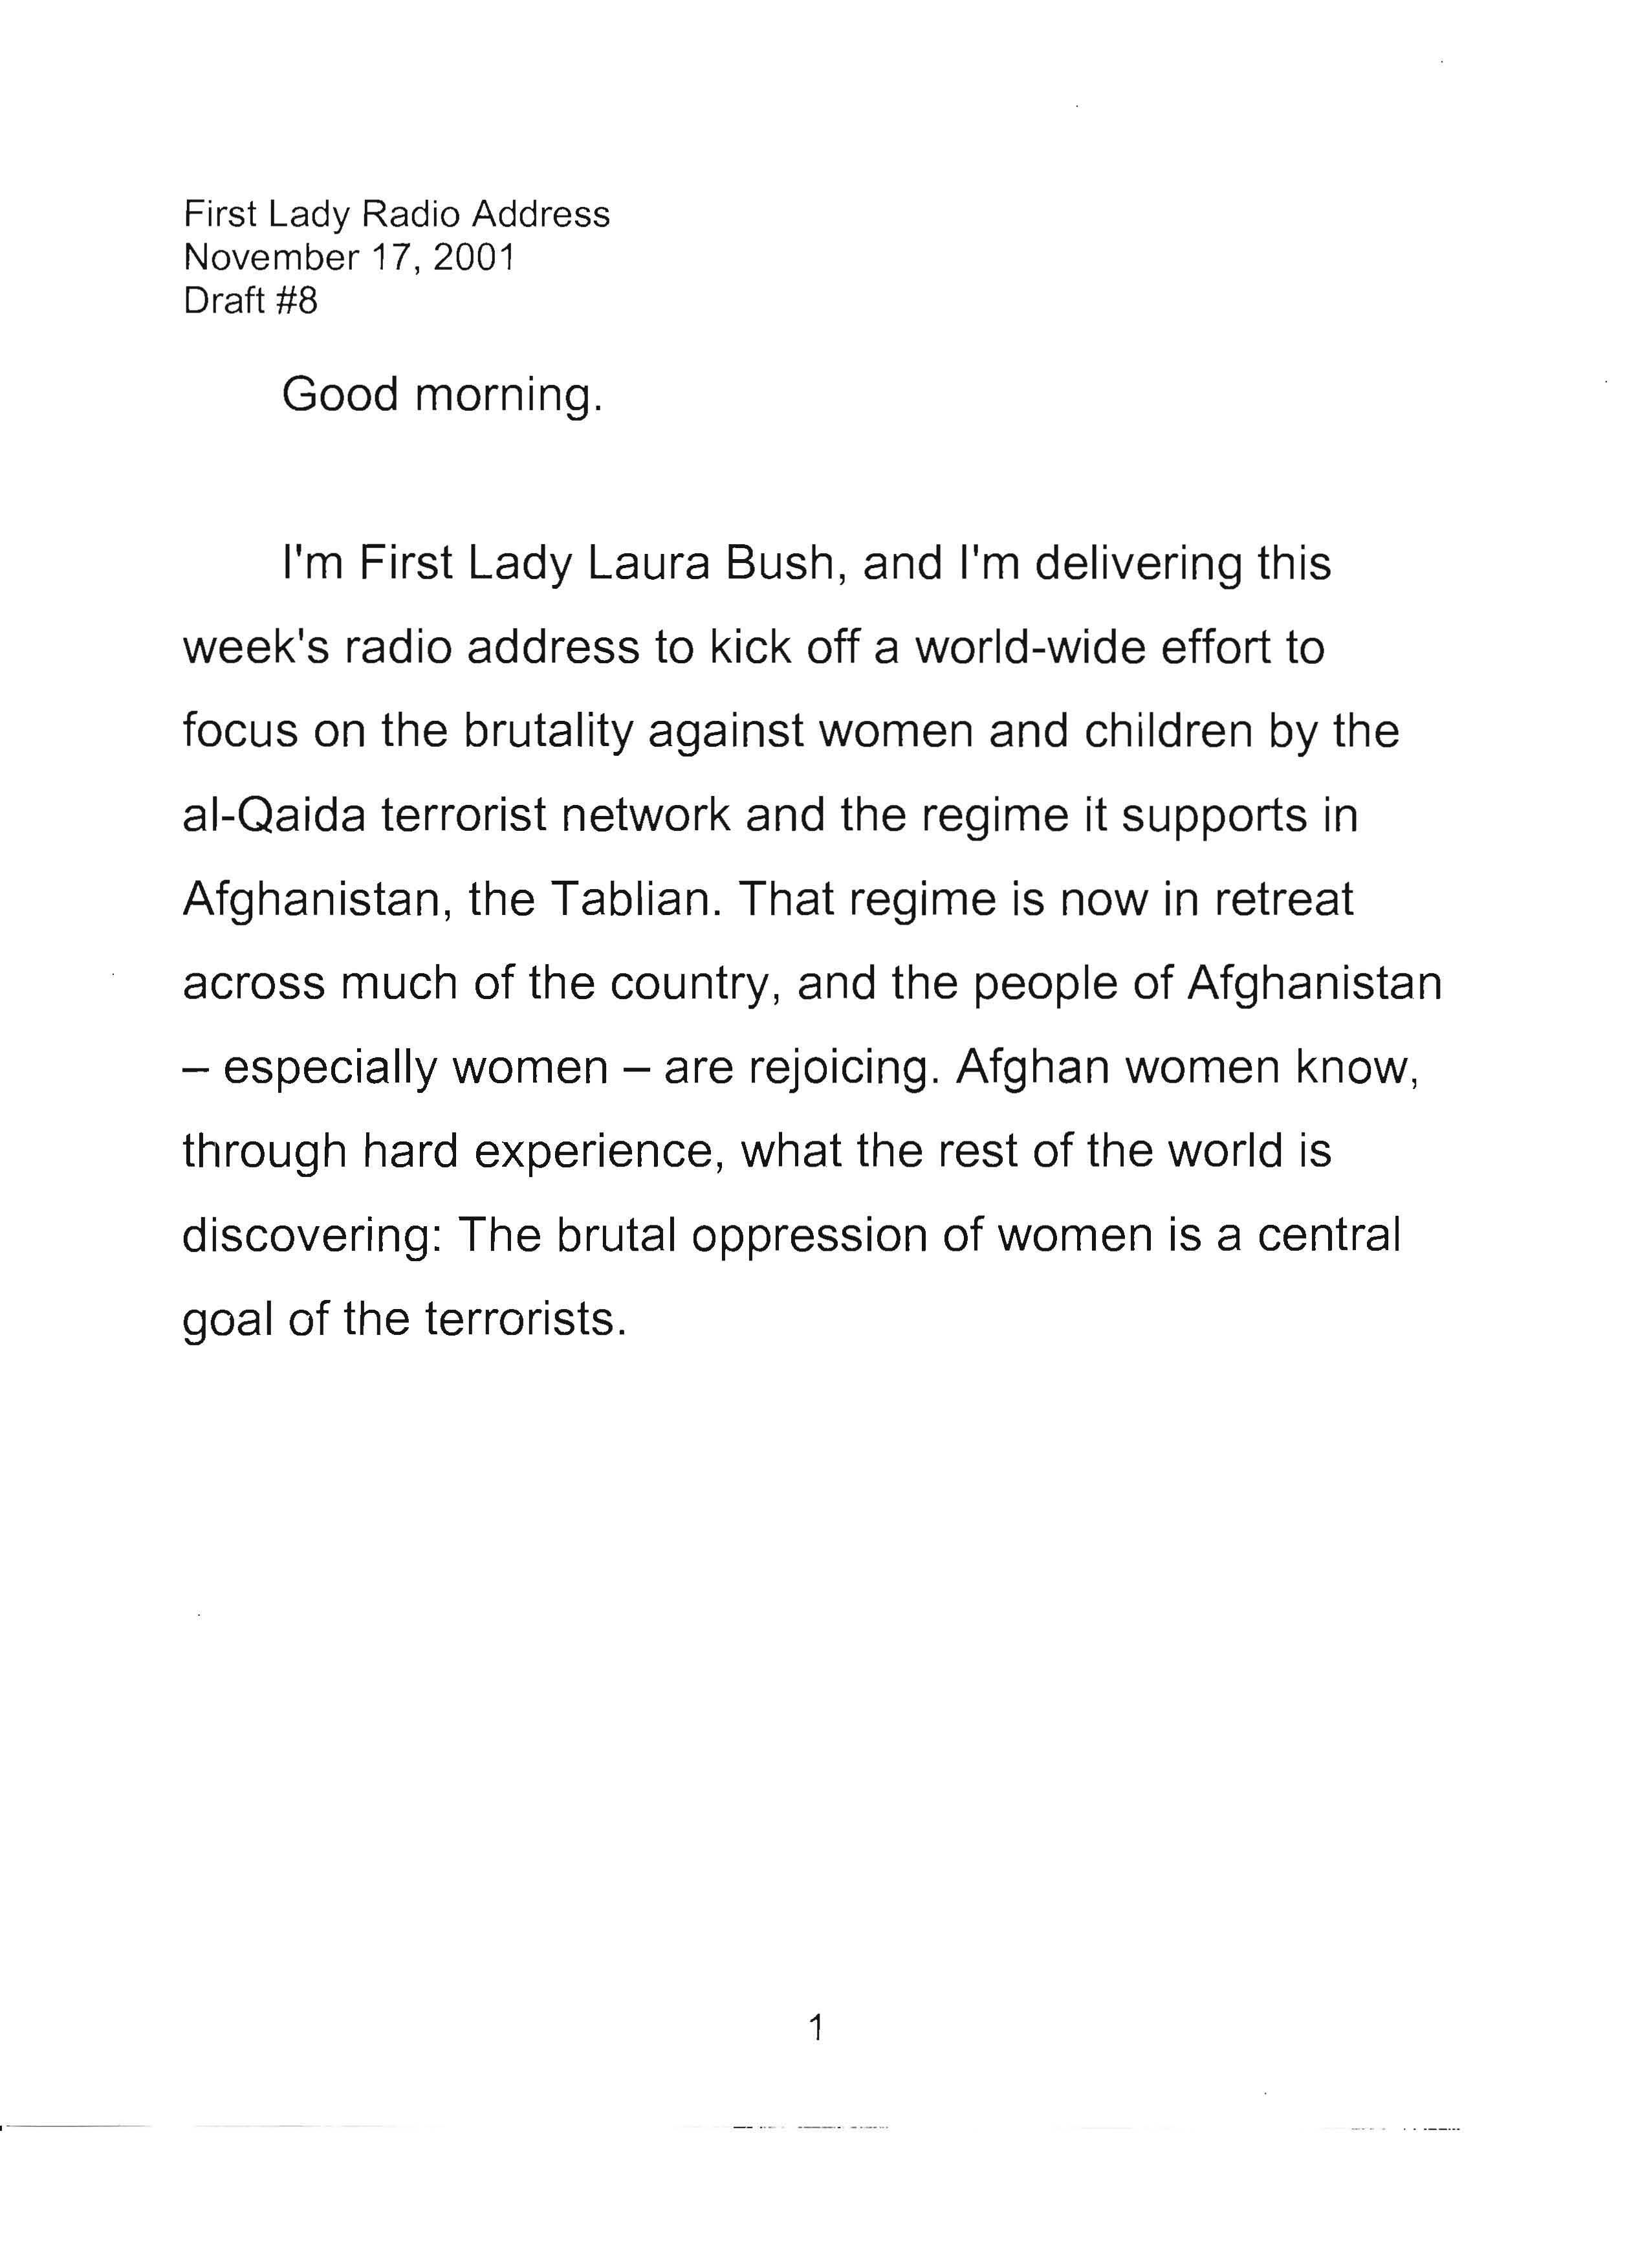 Statement used by First Lady Laura Bush to deliver a radio address on November 17, 2001 about the treatment of women and children by the Taliban in Afghanistan. (Page 1 of 5)